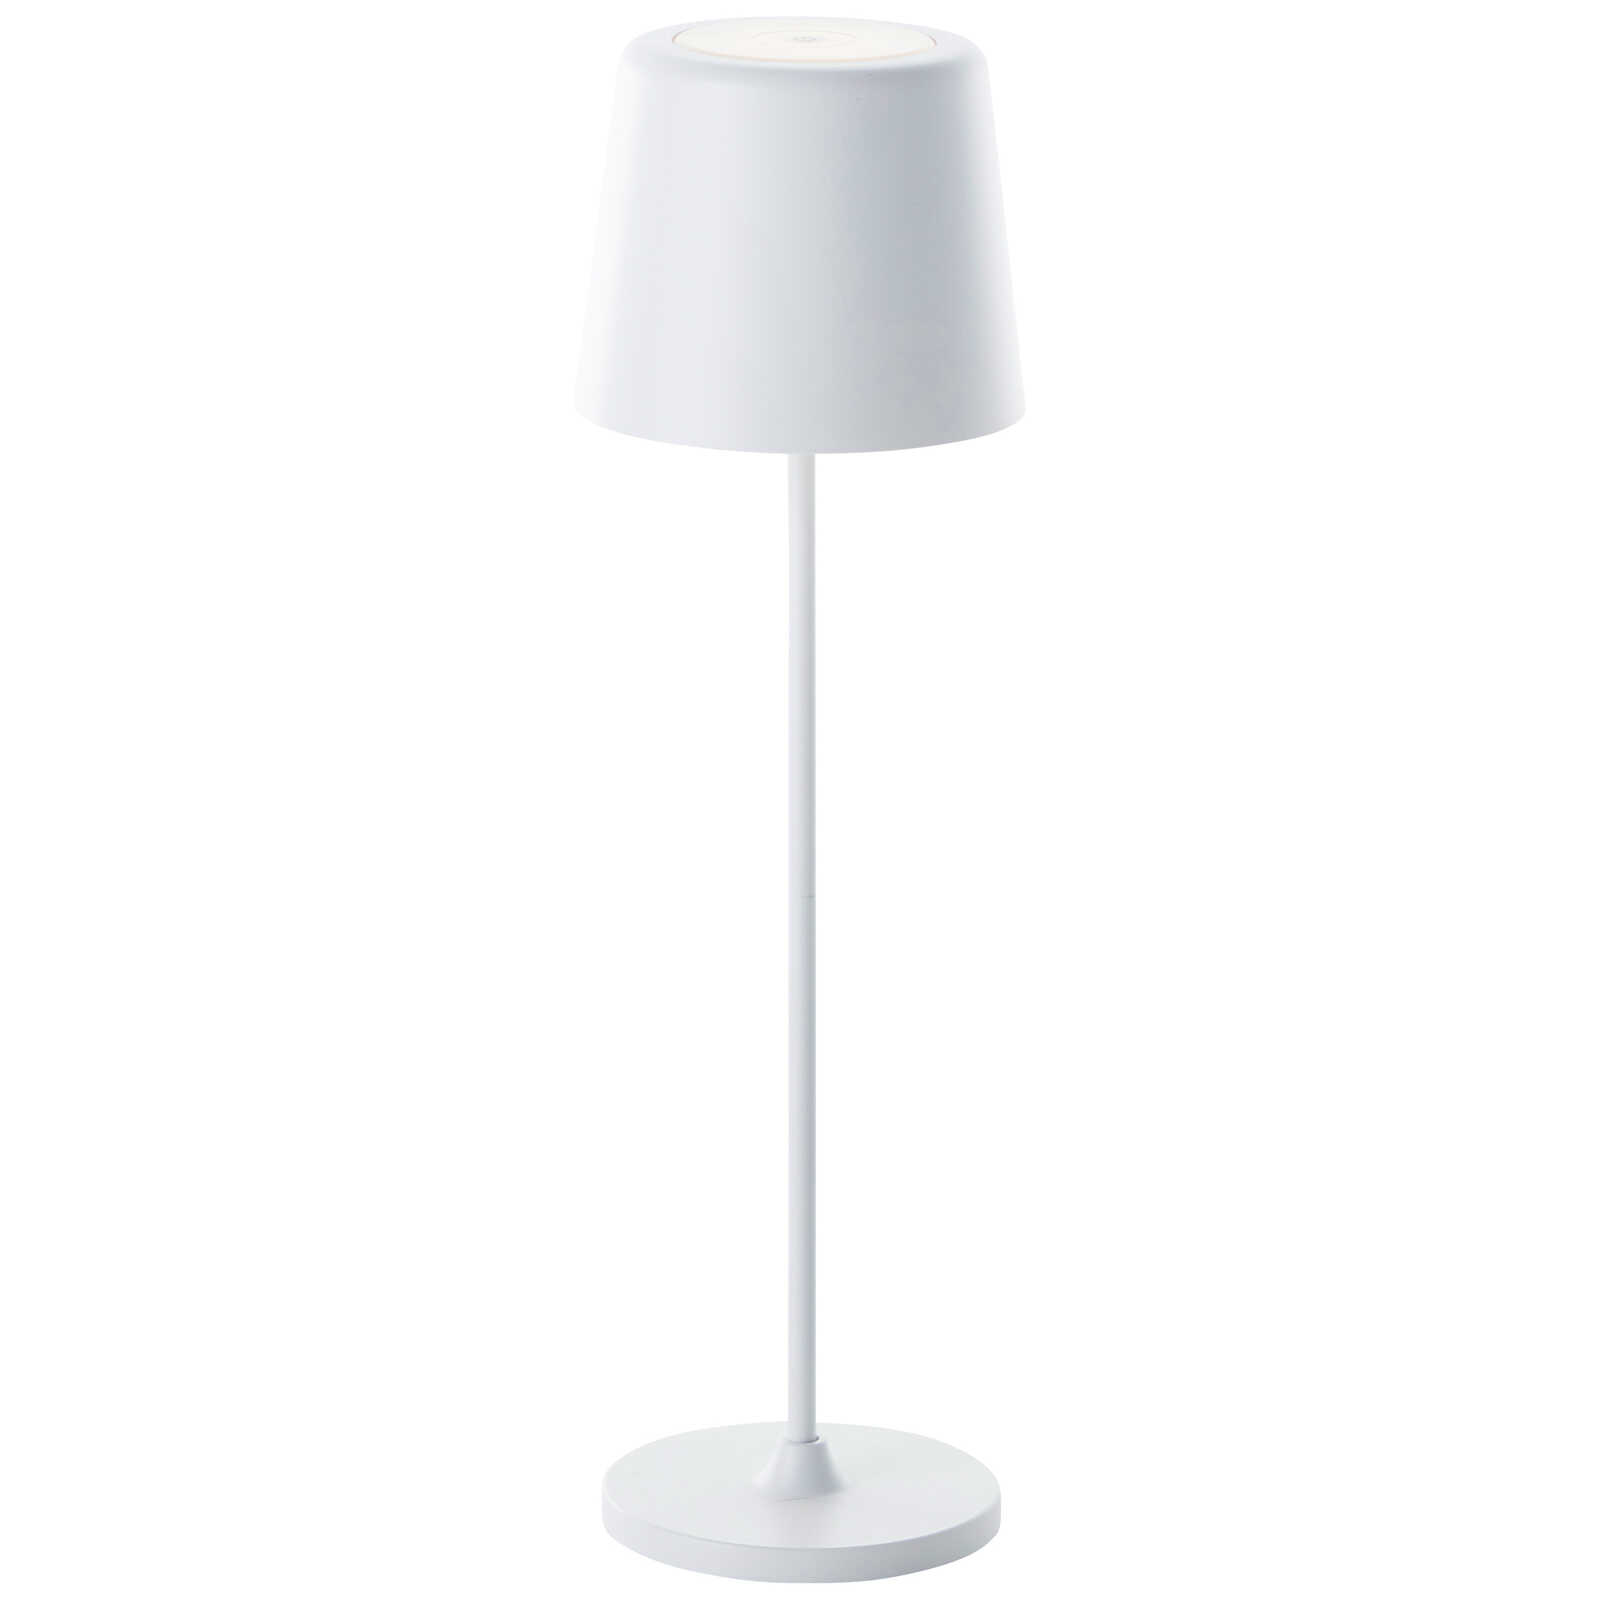             Metal table lamp - Cosy 5 - White
        